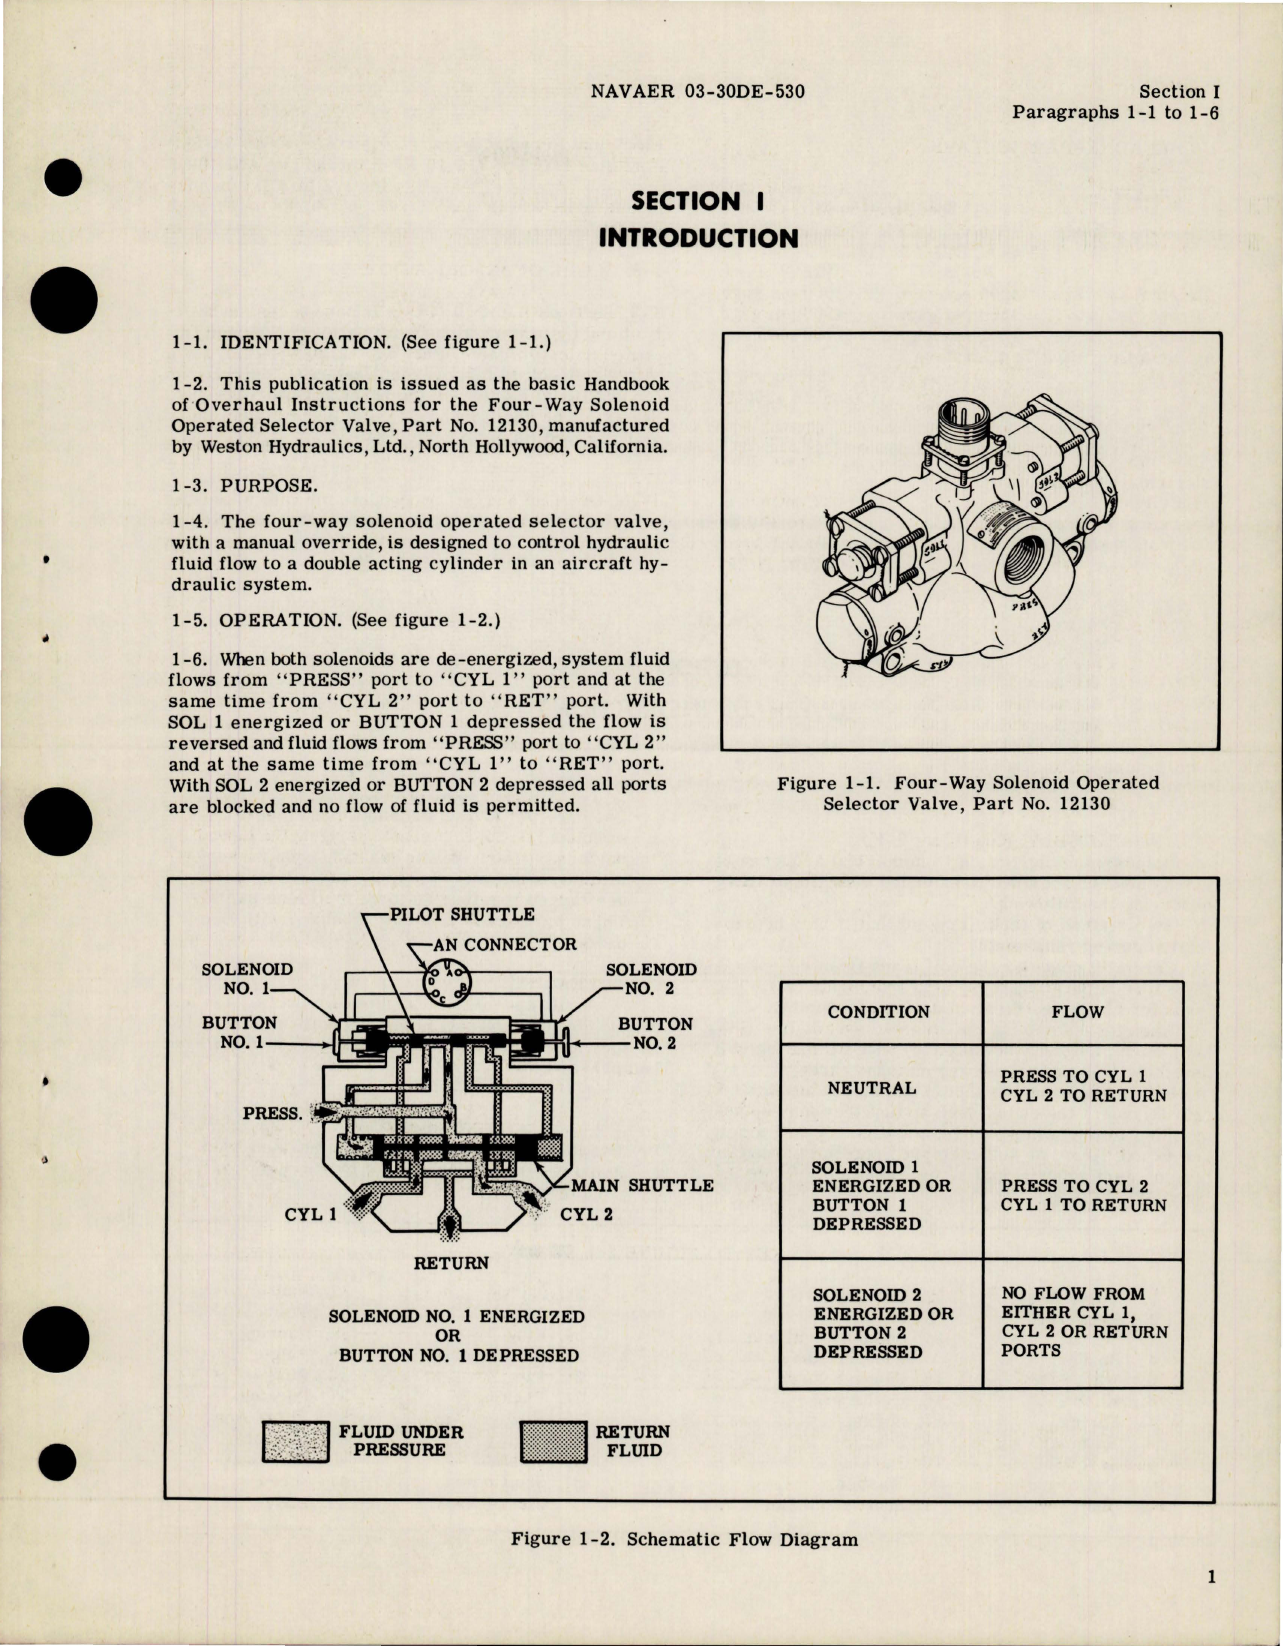 Sample page 5 from AirCorps Library document: Overhaul Instructions for Four-Way Solenoid Operated Selector Valves - Parts 12130, 12130-2, 12390